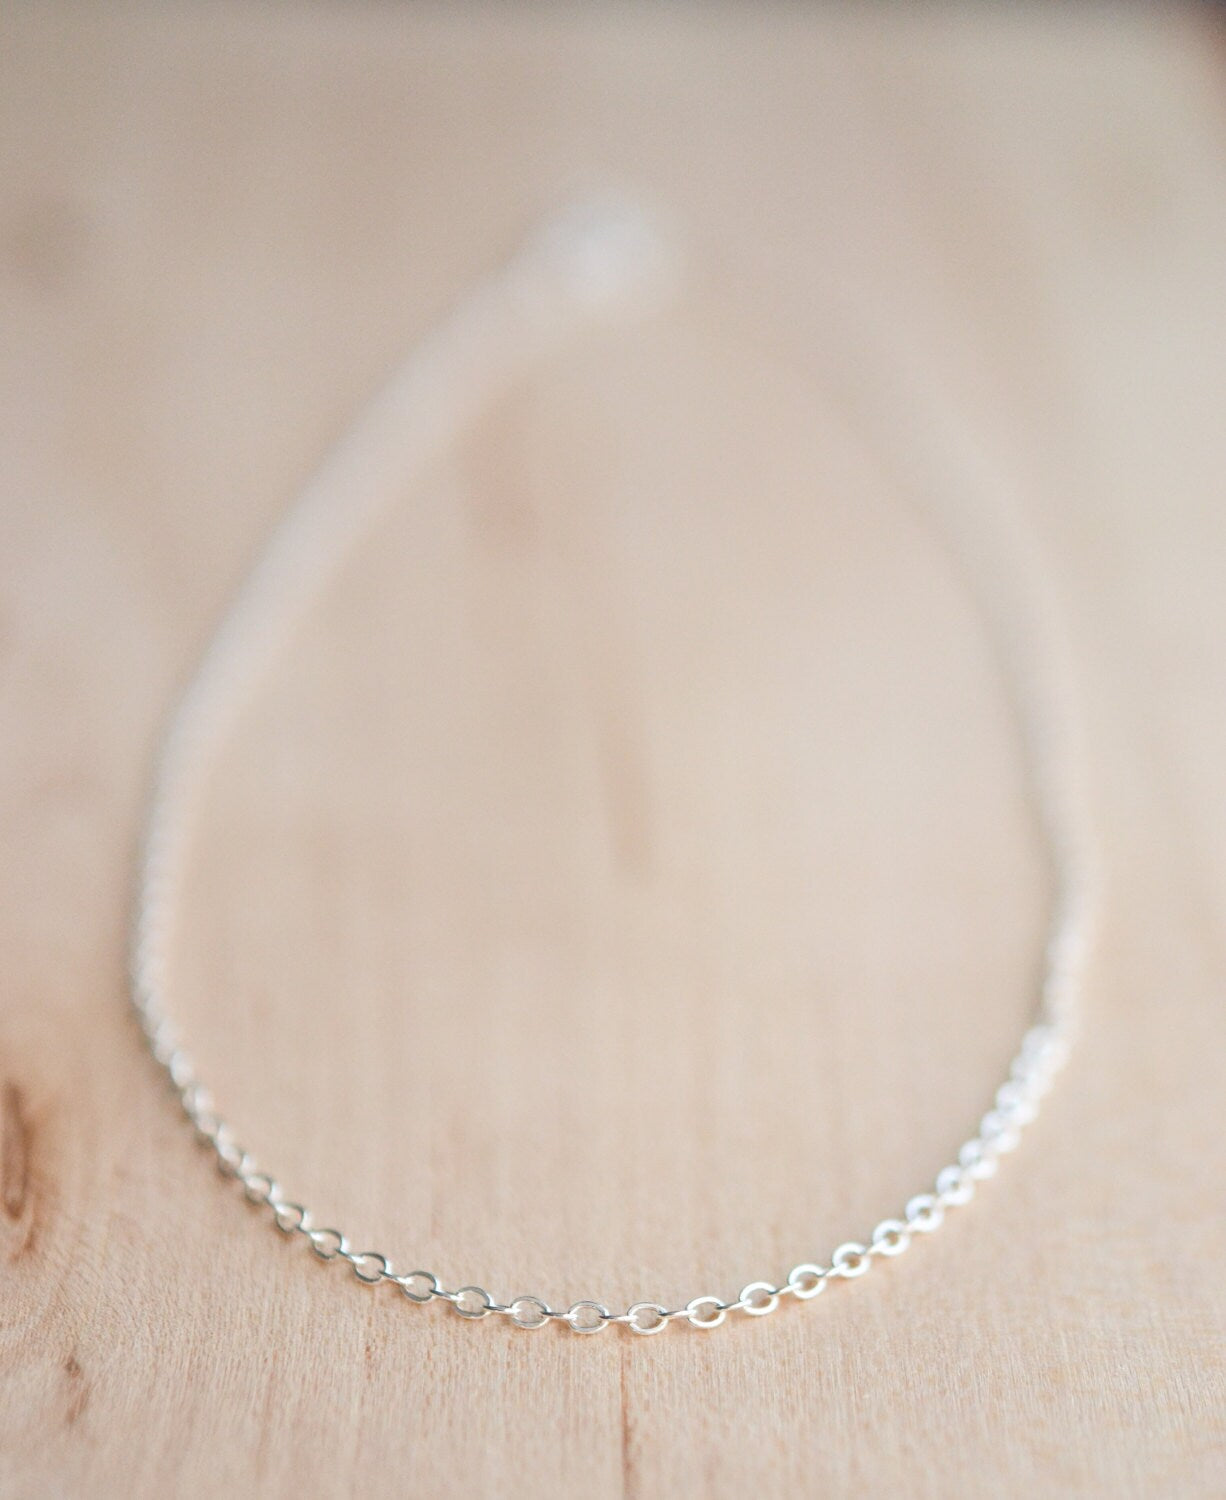 Sterling Silver Chain Necklace // Plain Silver Necklace // Add your Own Charm // Plain Sterling Silver Chain // Choose Your Length